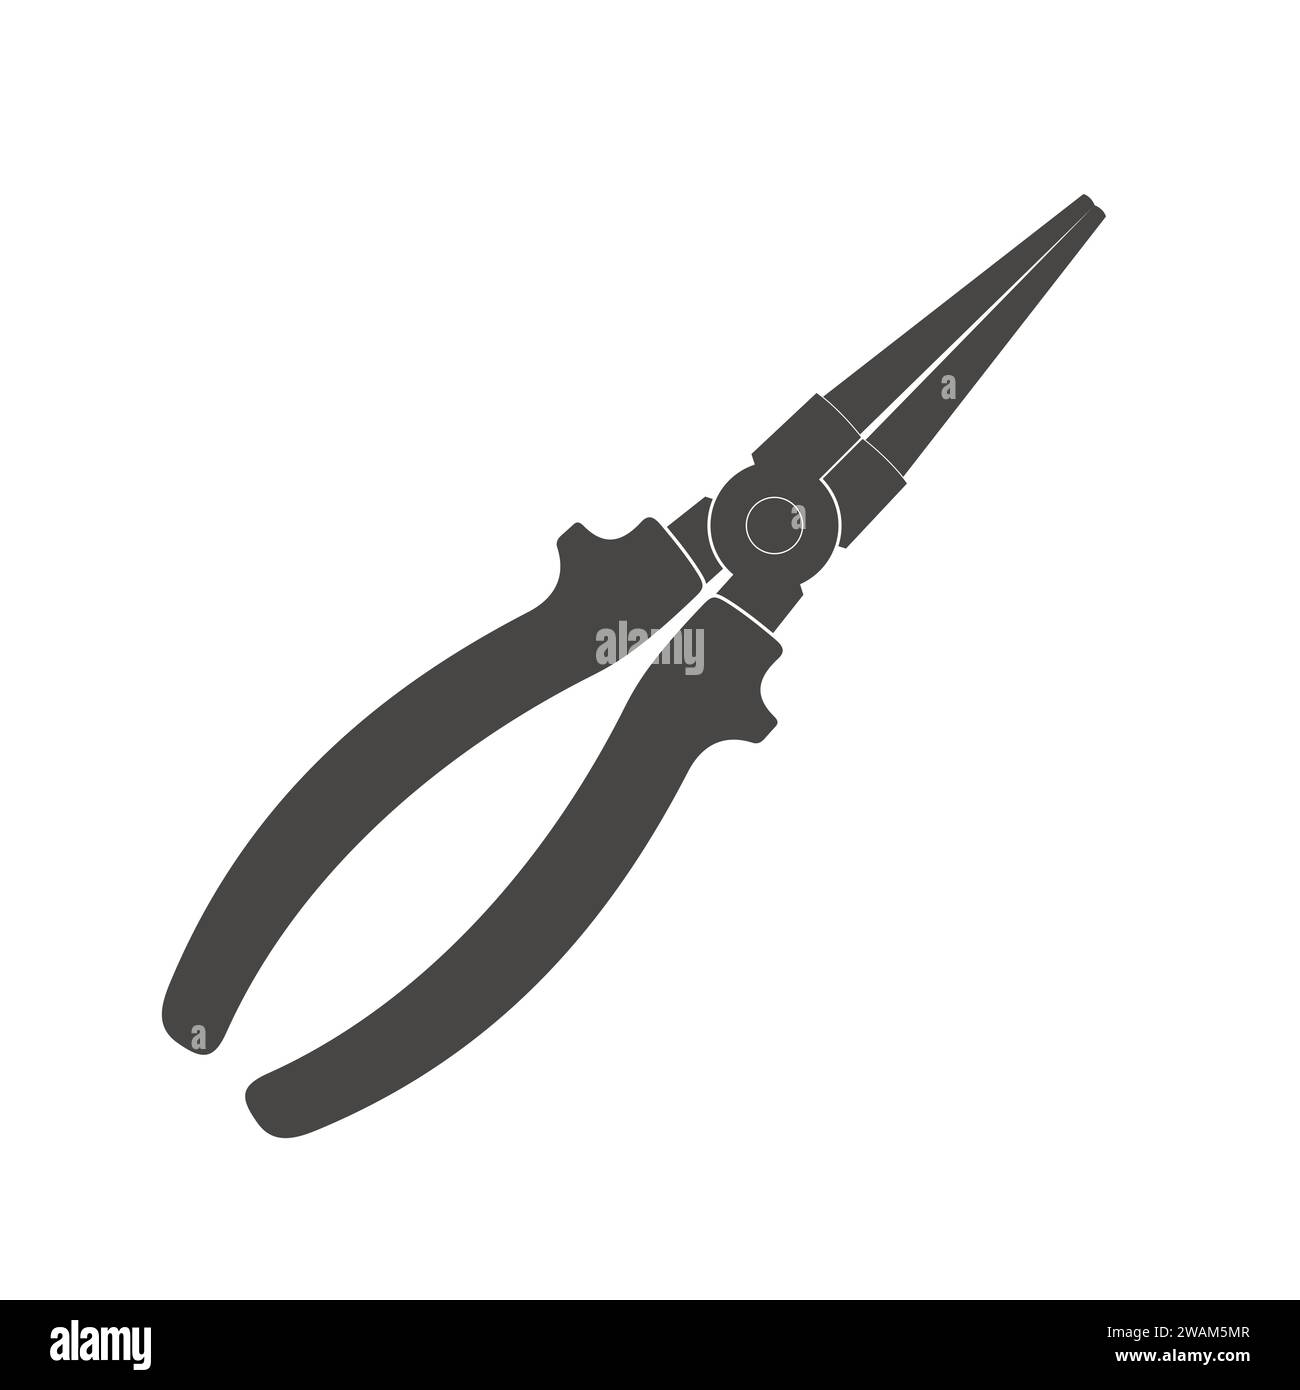 Pliers round icon isolated on white background. Builder, construction and repair hand tools with plastic handles. Long nose pliers vector illustration Stock Vector